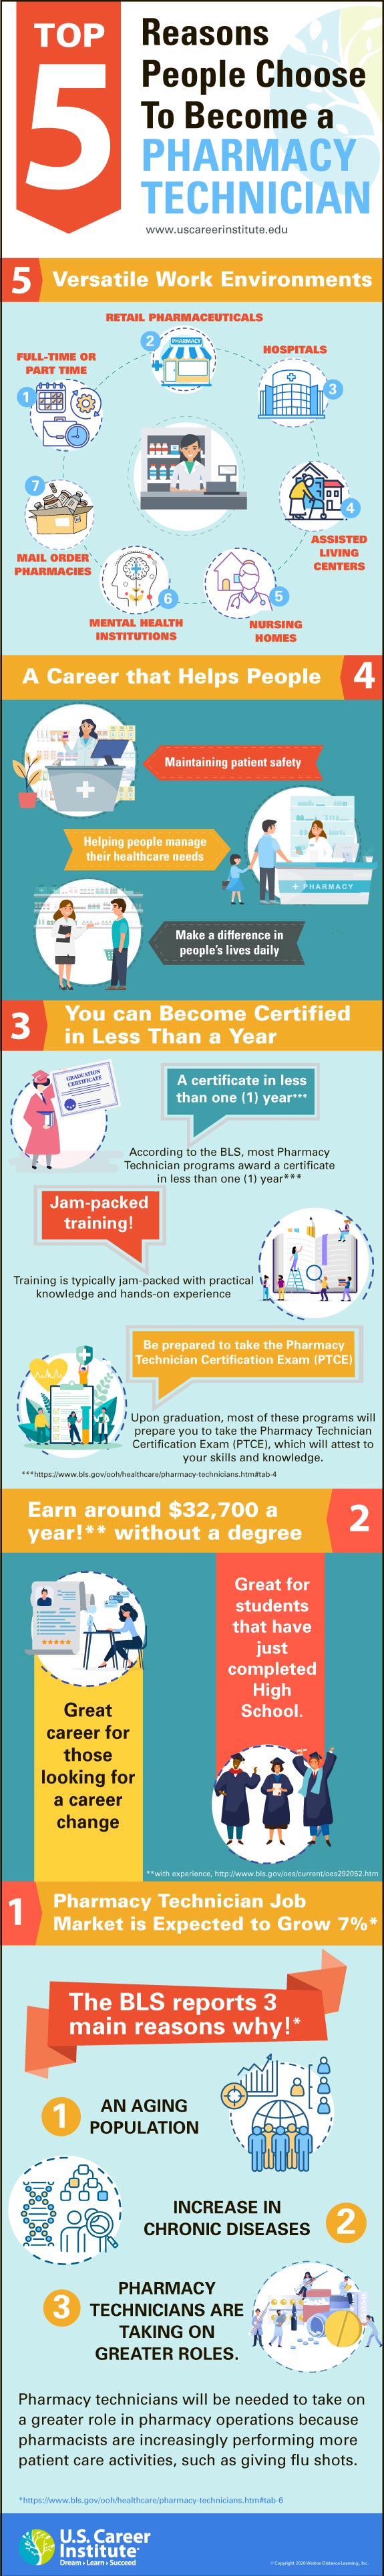 Top 5 Reasons to become a Pharmacy Technician